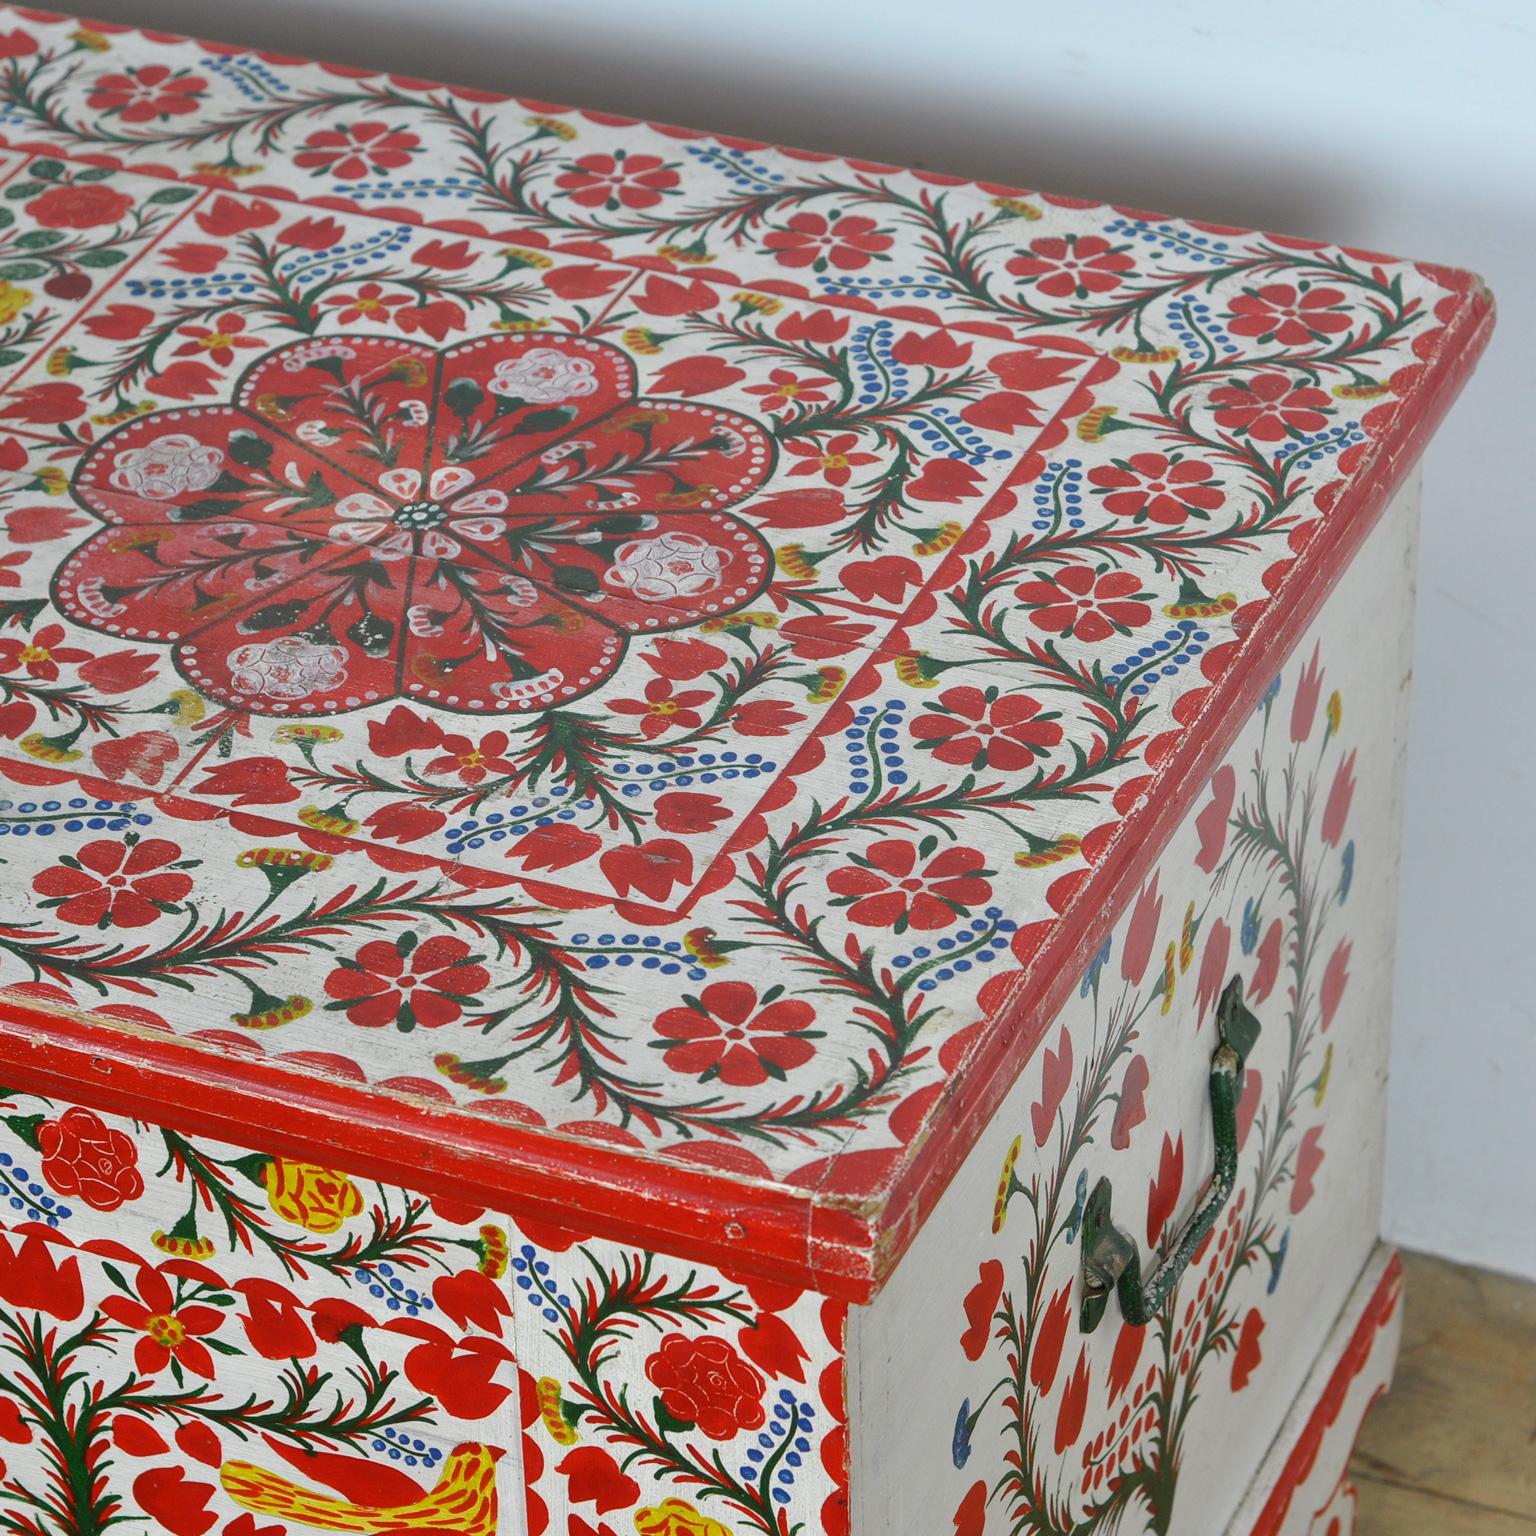 Folk Art Wedding Chest, Anno 1960 In Good Condition For Sale In Amsterdam, Noord Holland